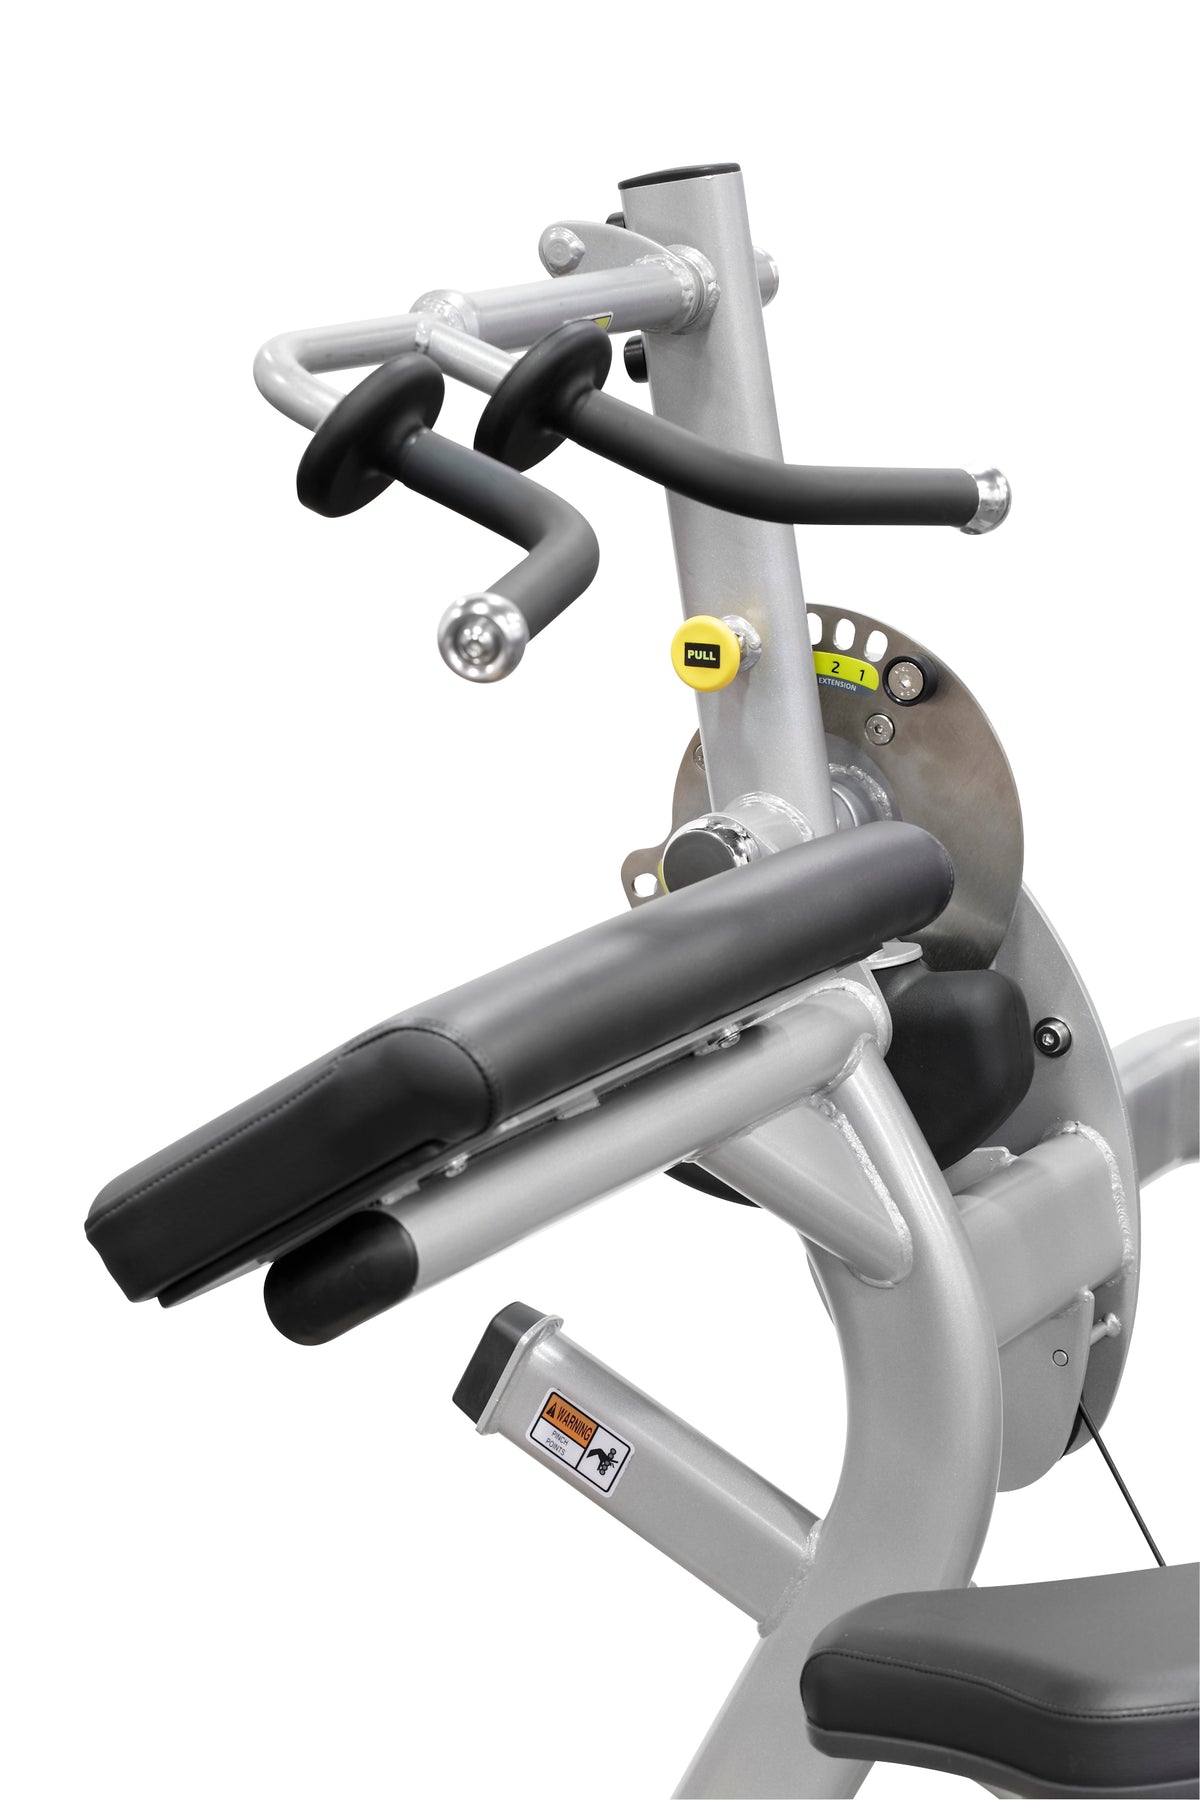 Hoist Fitness HD-3100 Preacher Curl/ Triceps Extension handle view | Fitness Experience